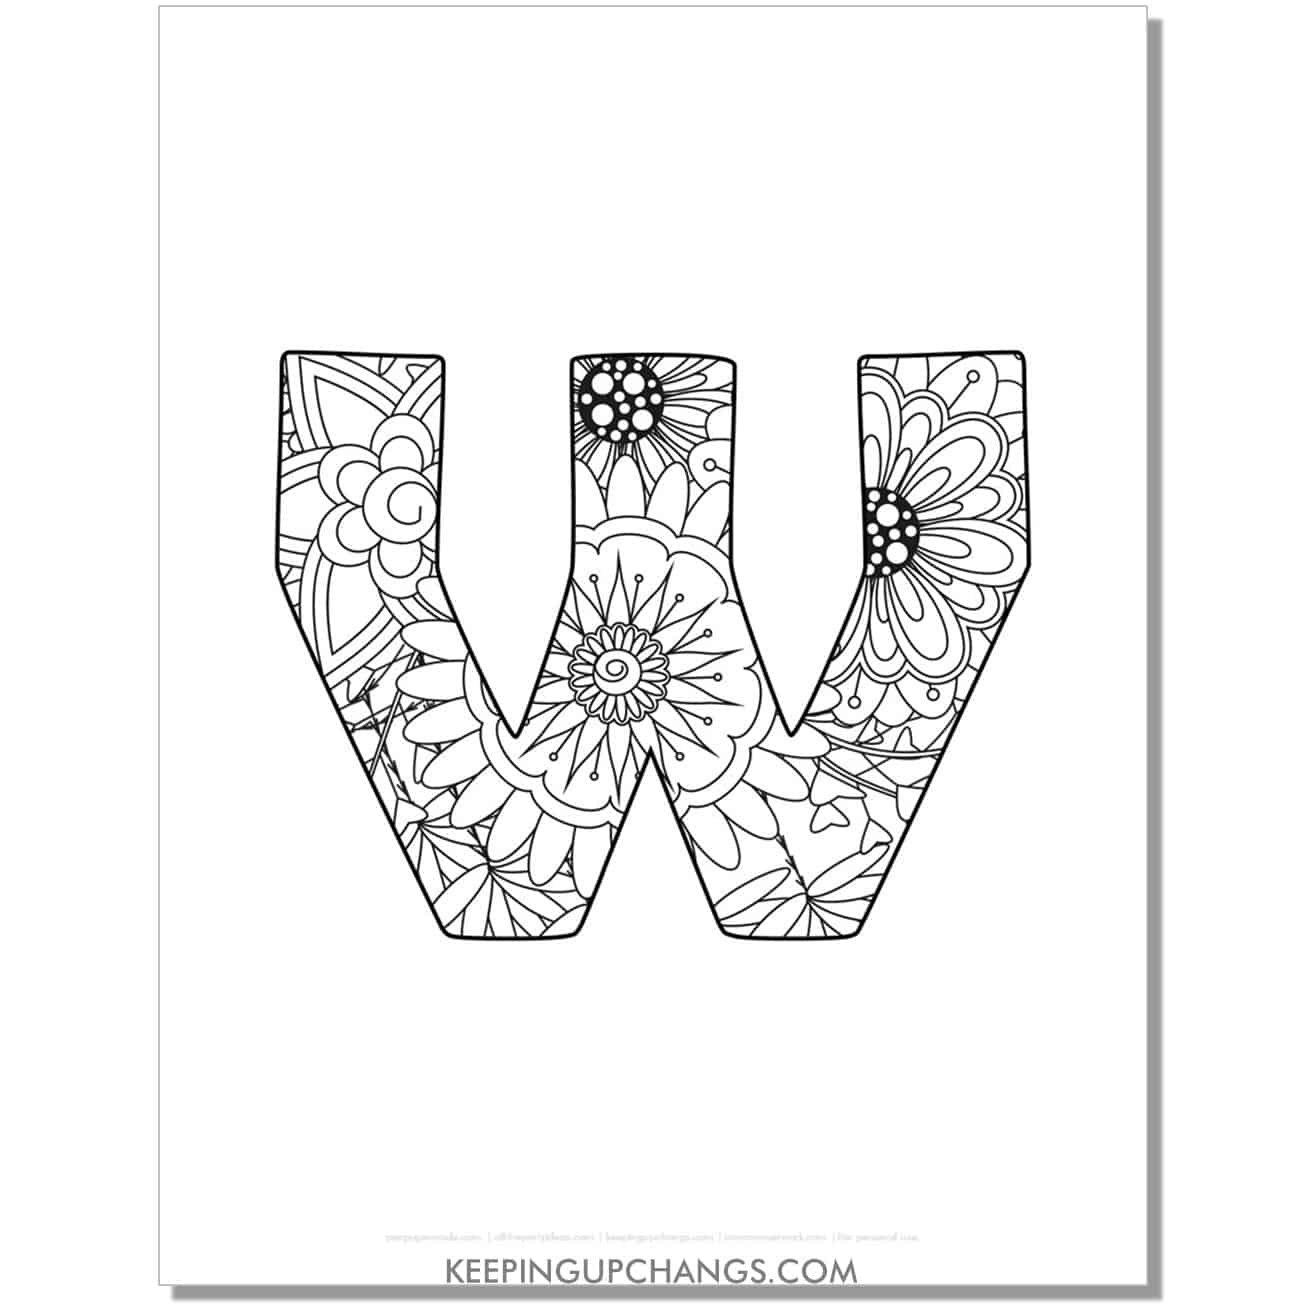 free letter w to color, complex mandala zentangle for adults.